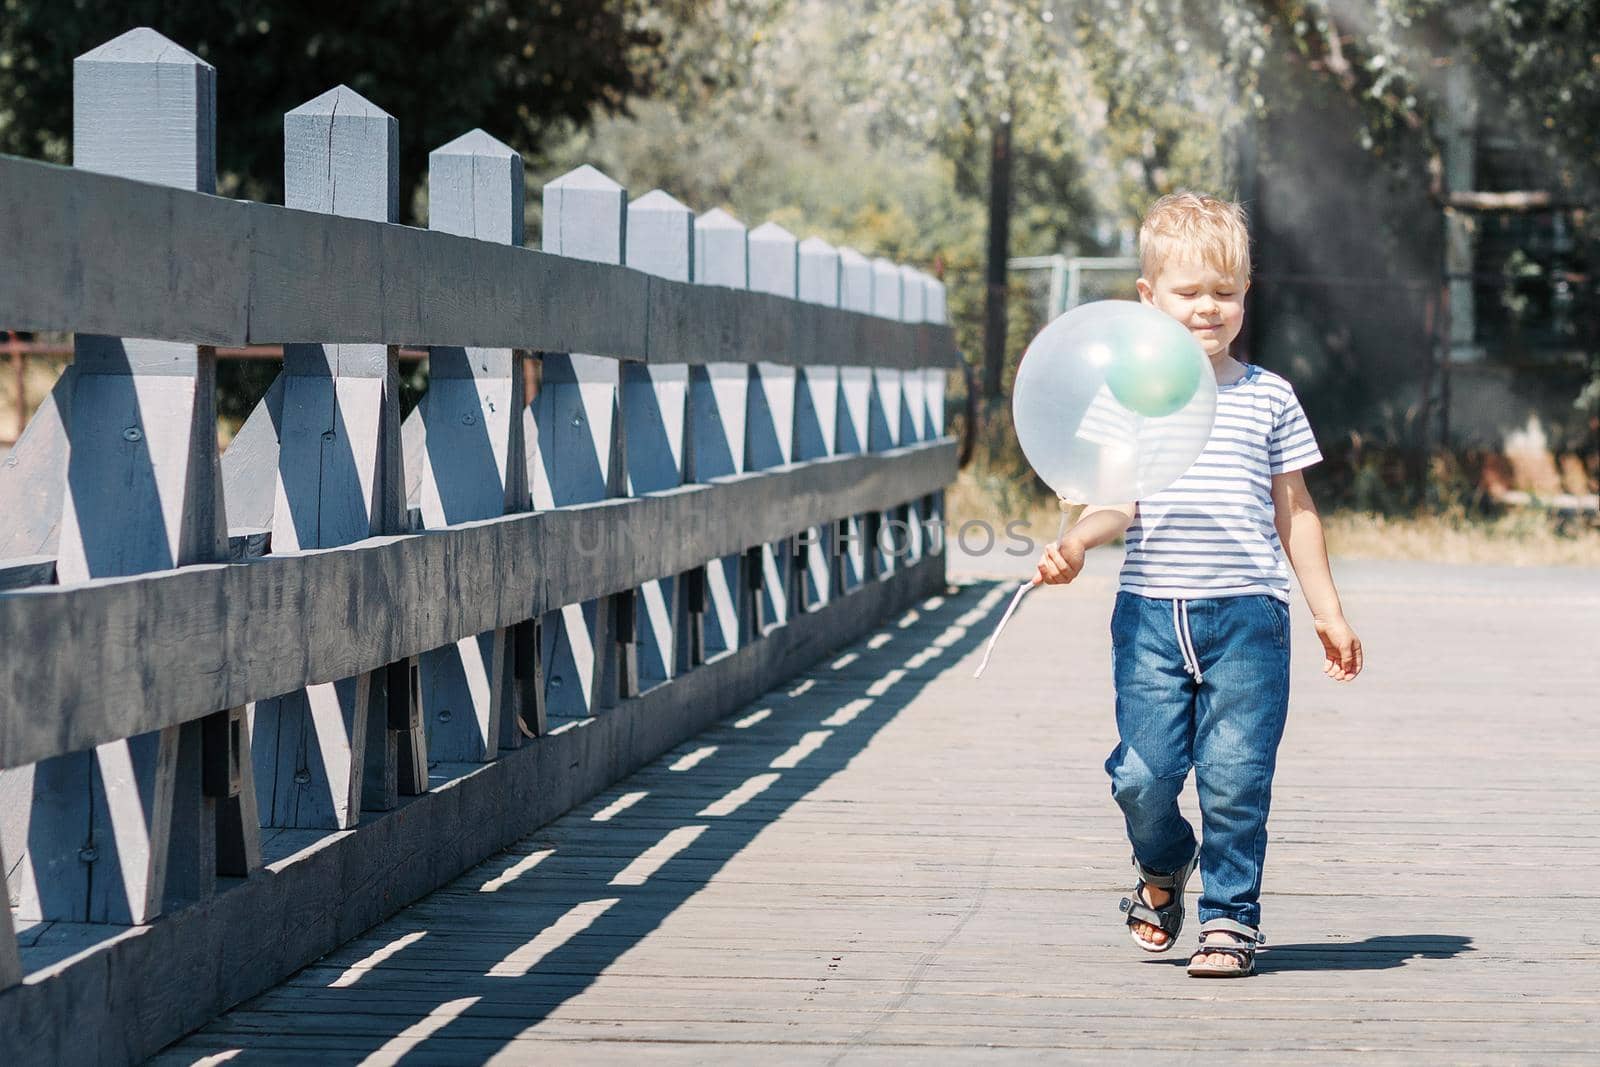 A child walks across a bridge on a sunny summer day in the city, carrying a hot air balloon.